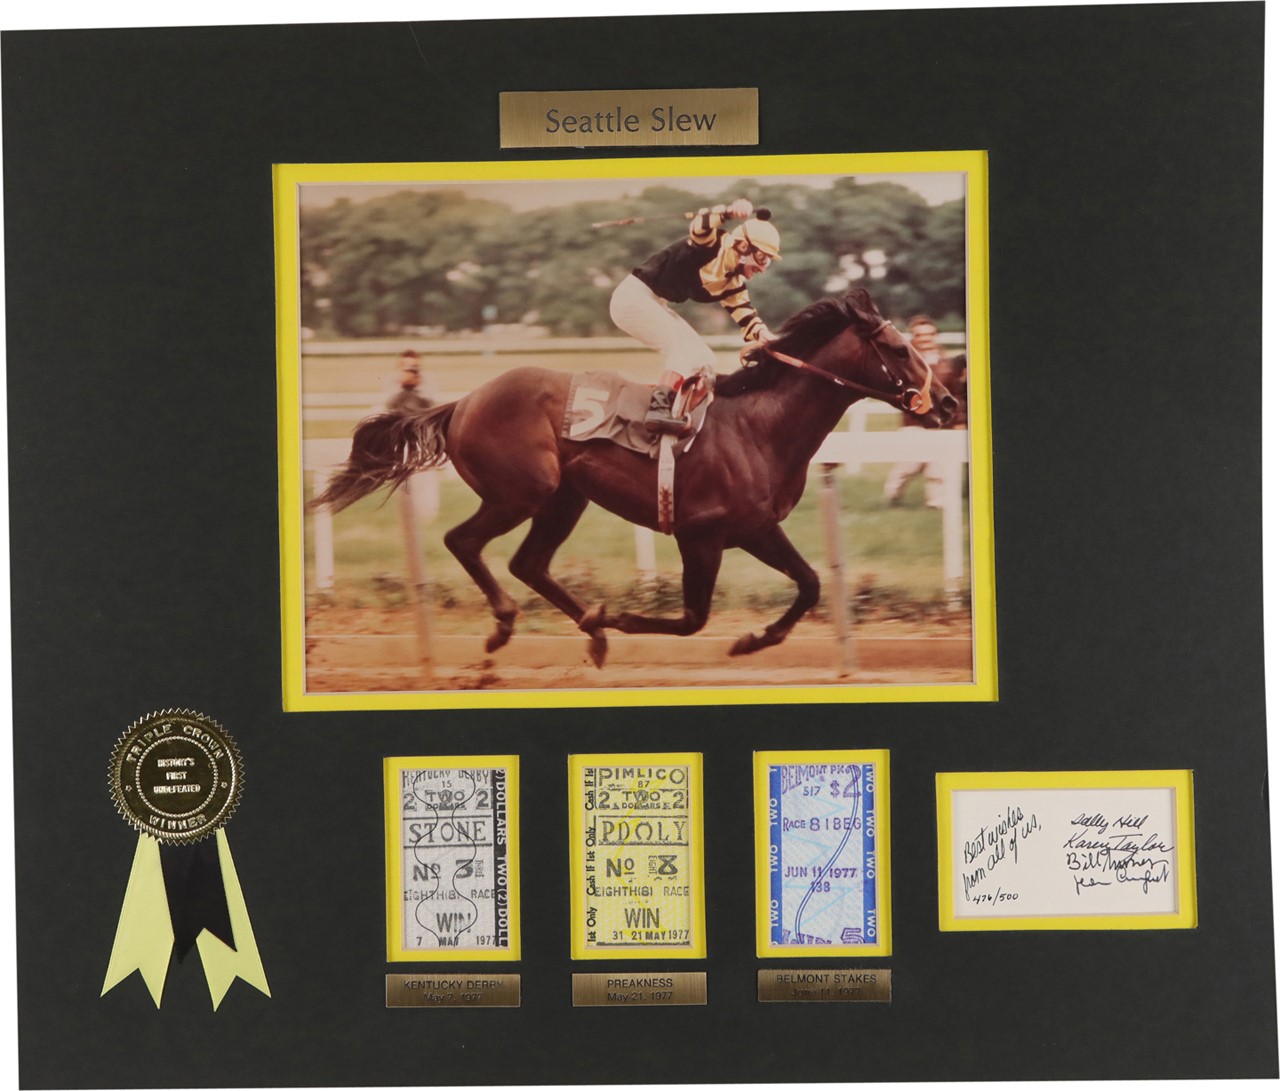 Horse Racing - Seattle Slew Triple Crown Win Ticket Display with Four Signatures